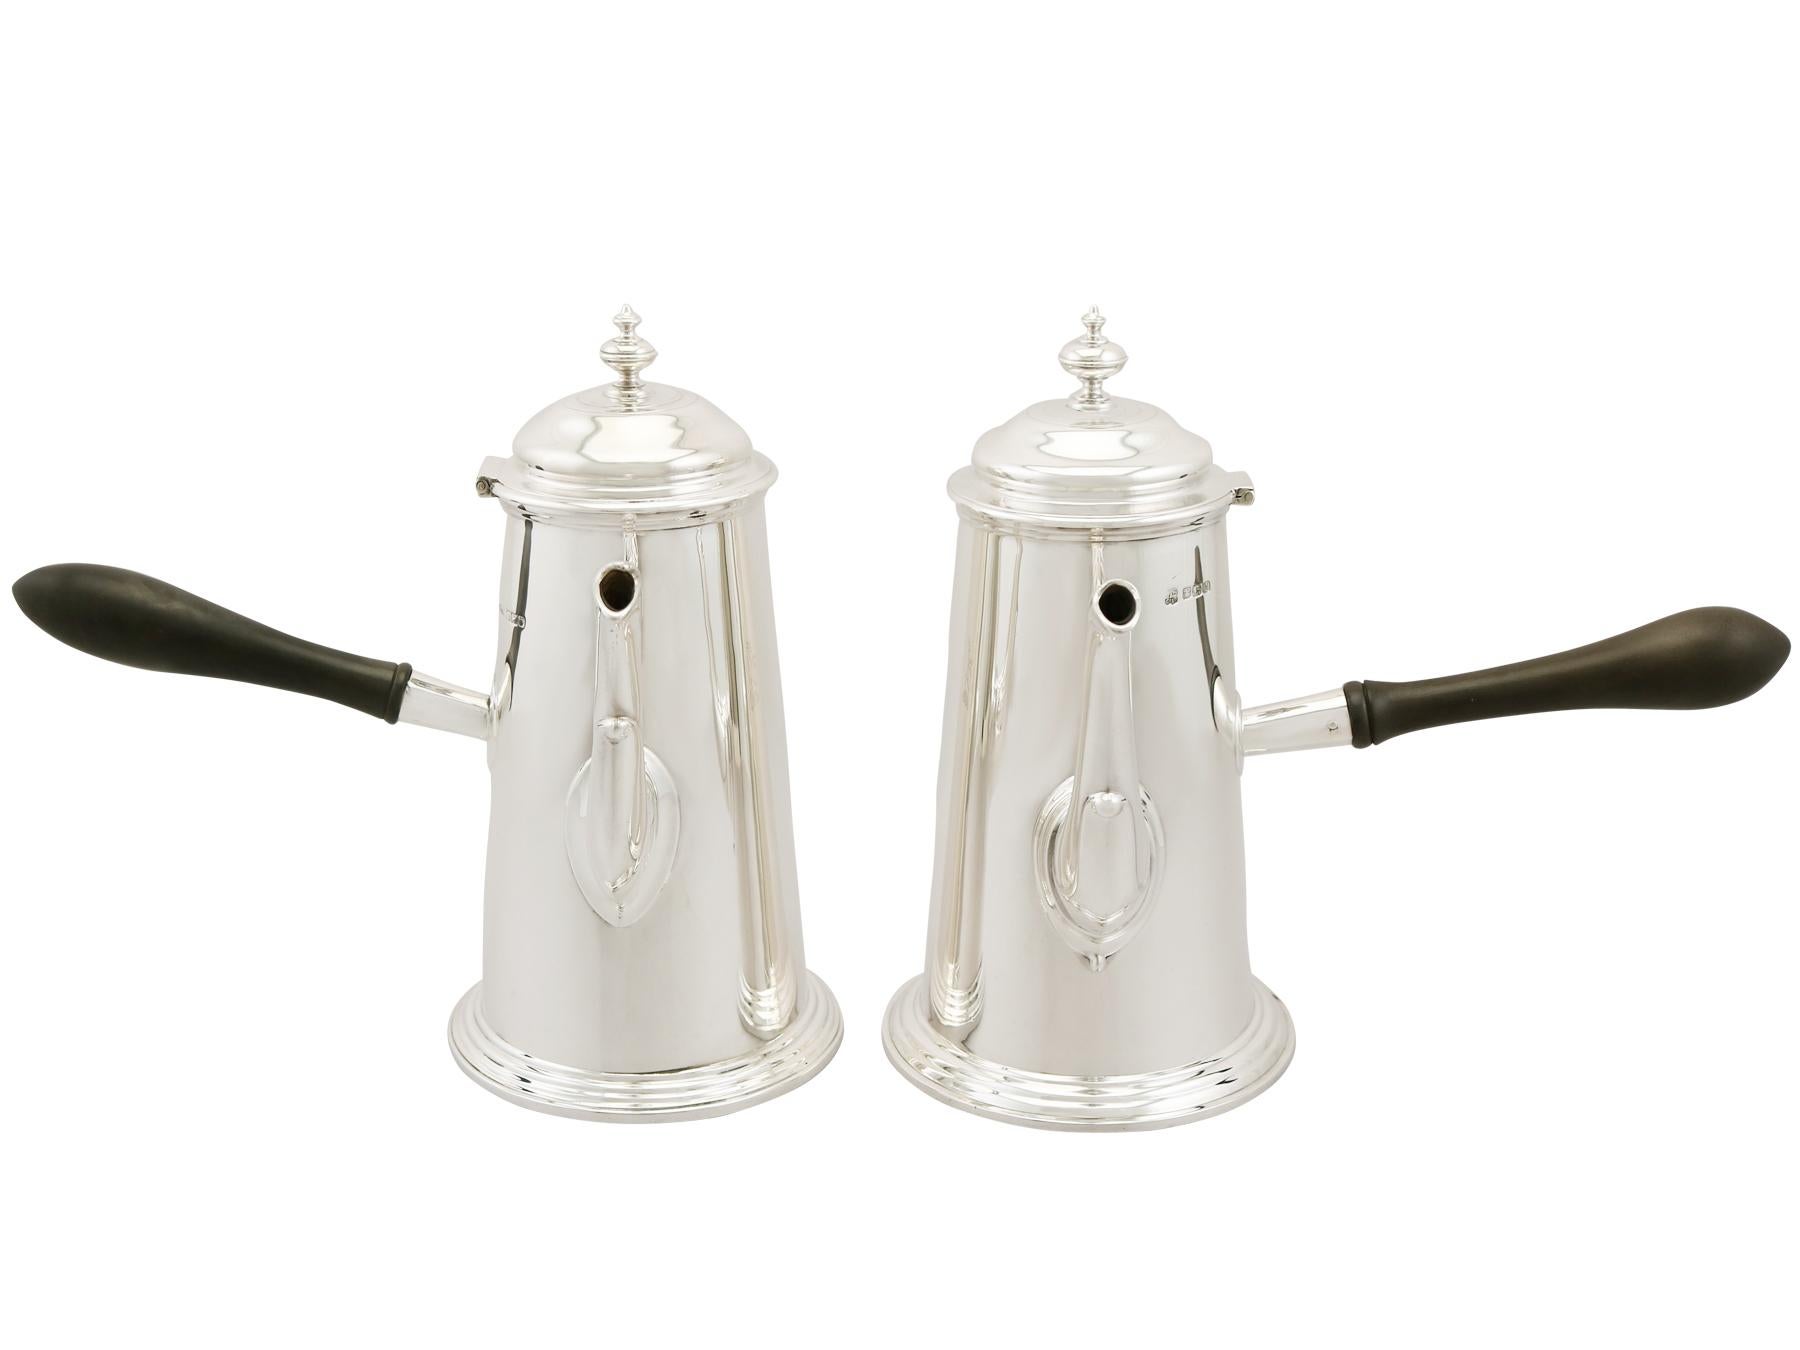 This exceptional antique George V sterling silver café au lait set consists of a coffee pot and hot milk pot.

Each piece has a plain cylindrical tapering form to a stepped spreading foot.

The surface of each piece is plain and embellished with